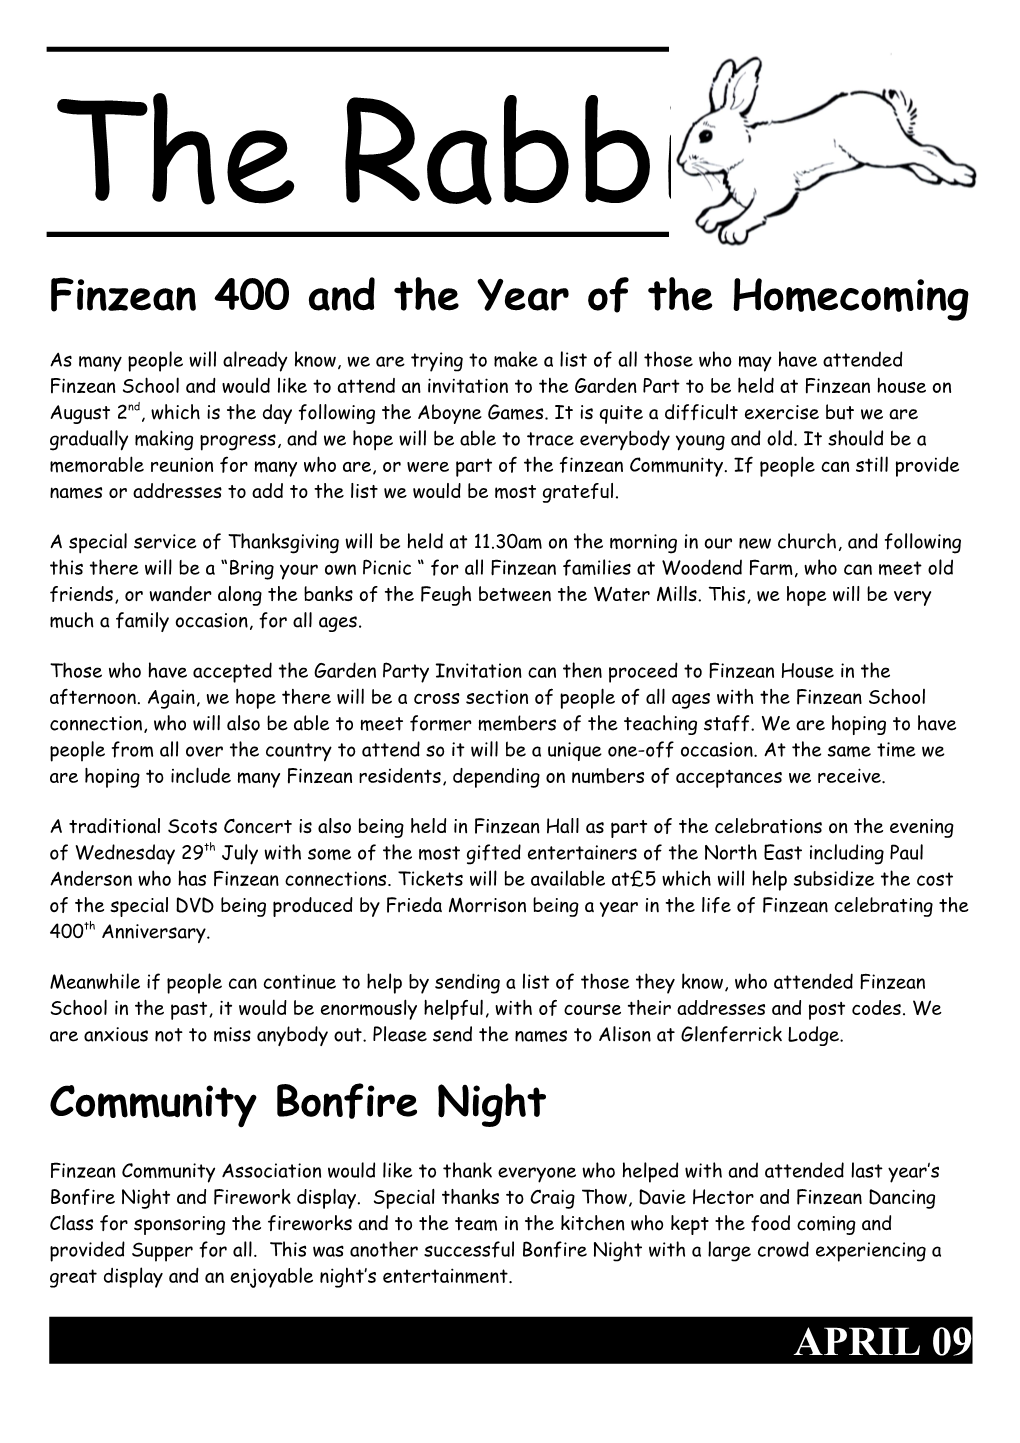 Finzean 400 and the Year of the Homecoming